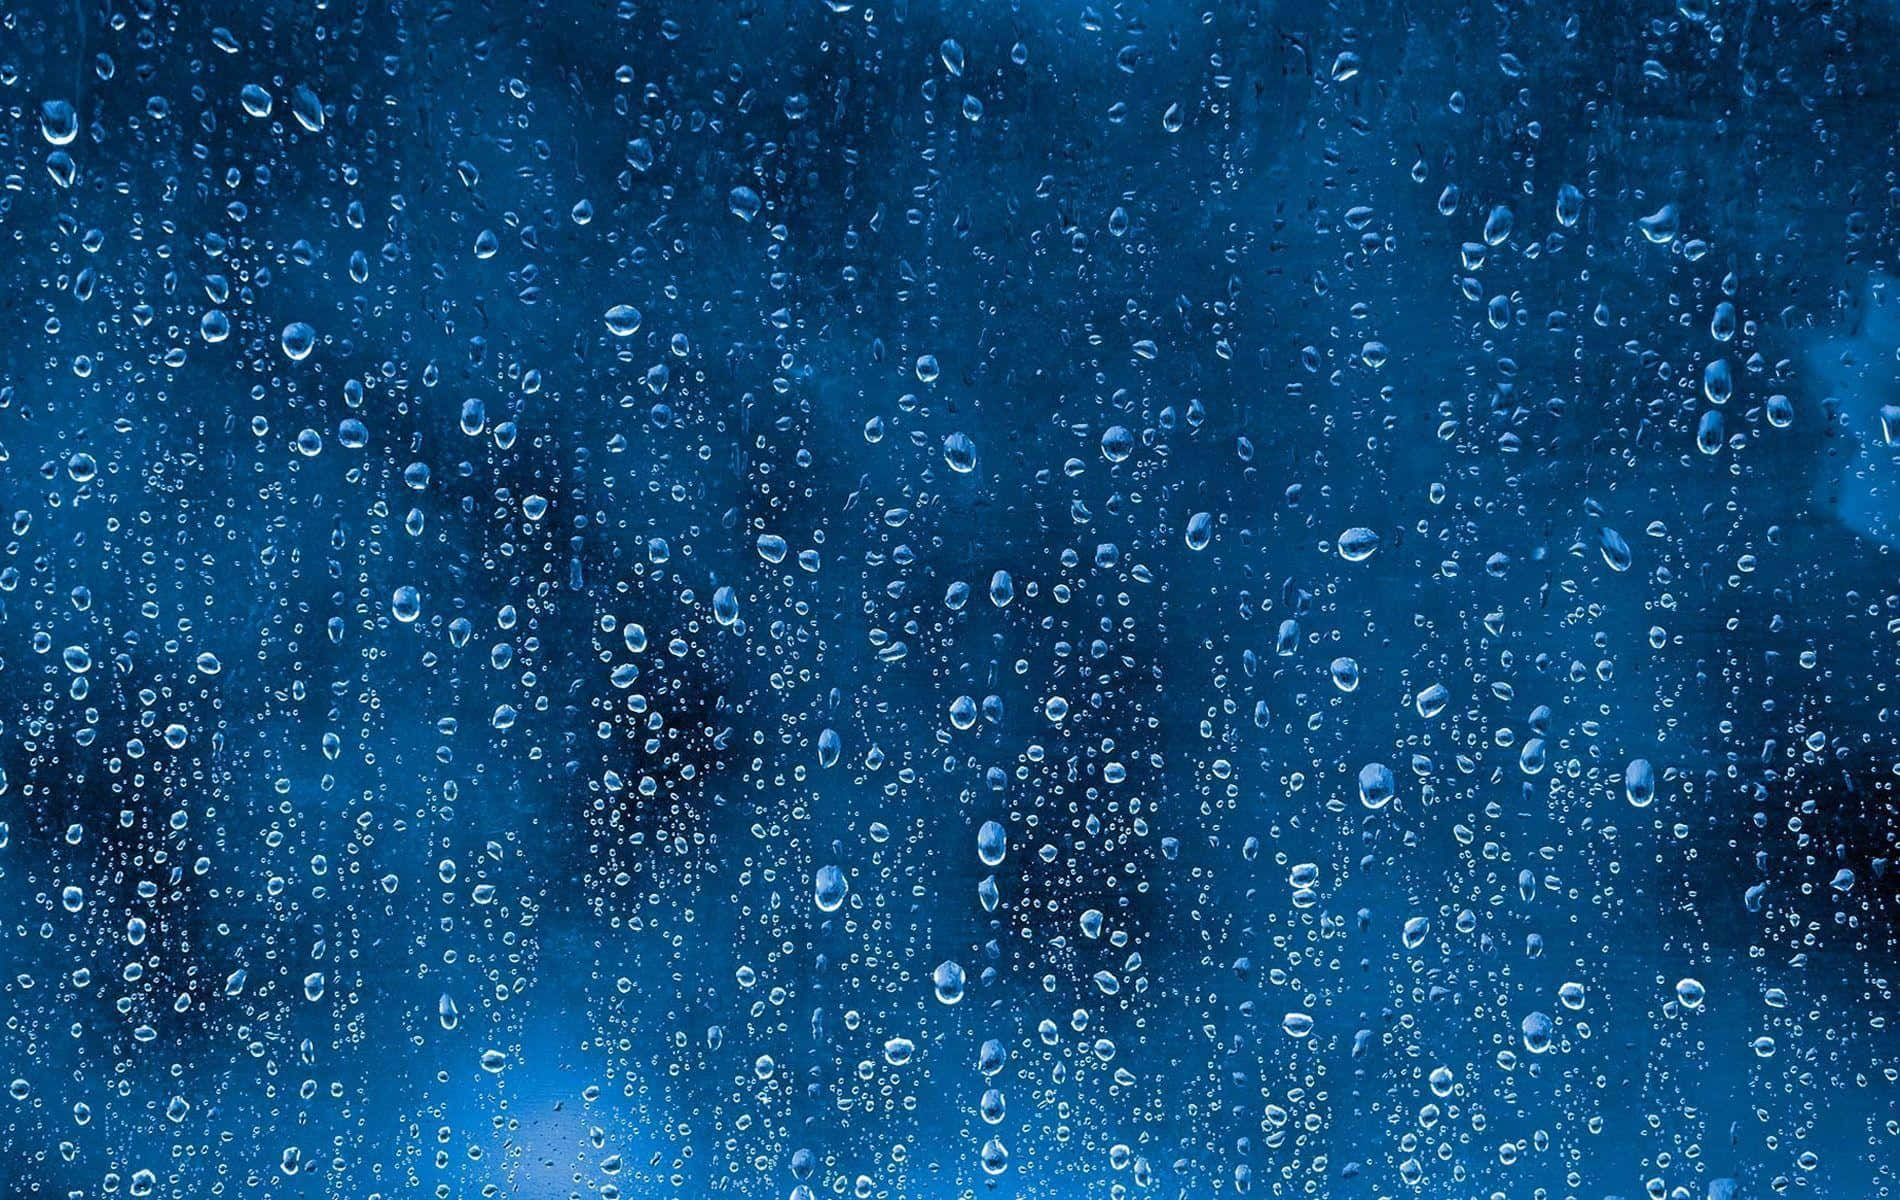 raindrops falling from the sky wallpaper